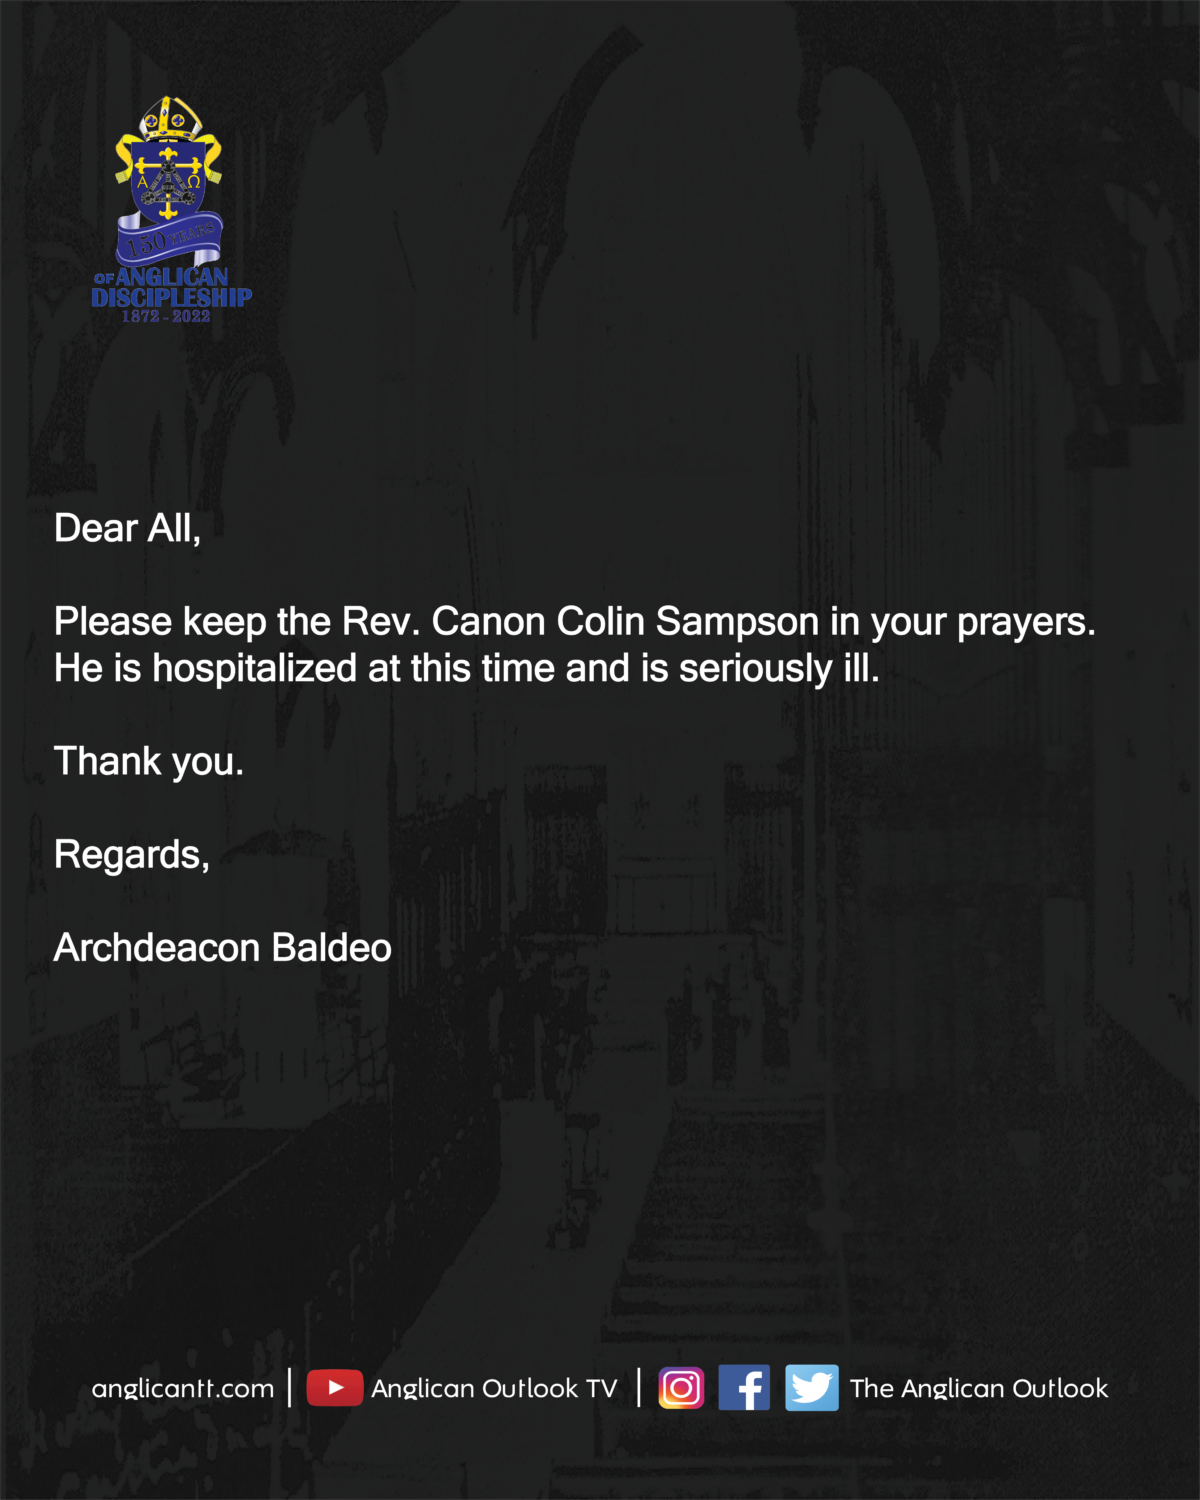 Canon Colin Sampson is Hospitalized